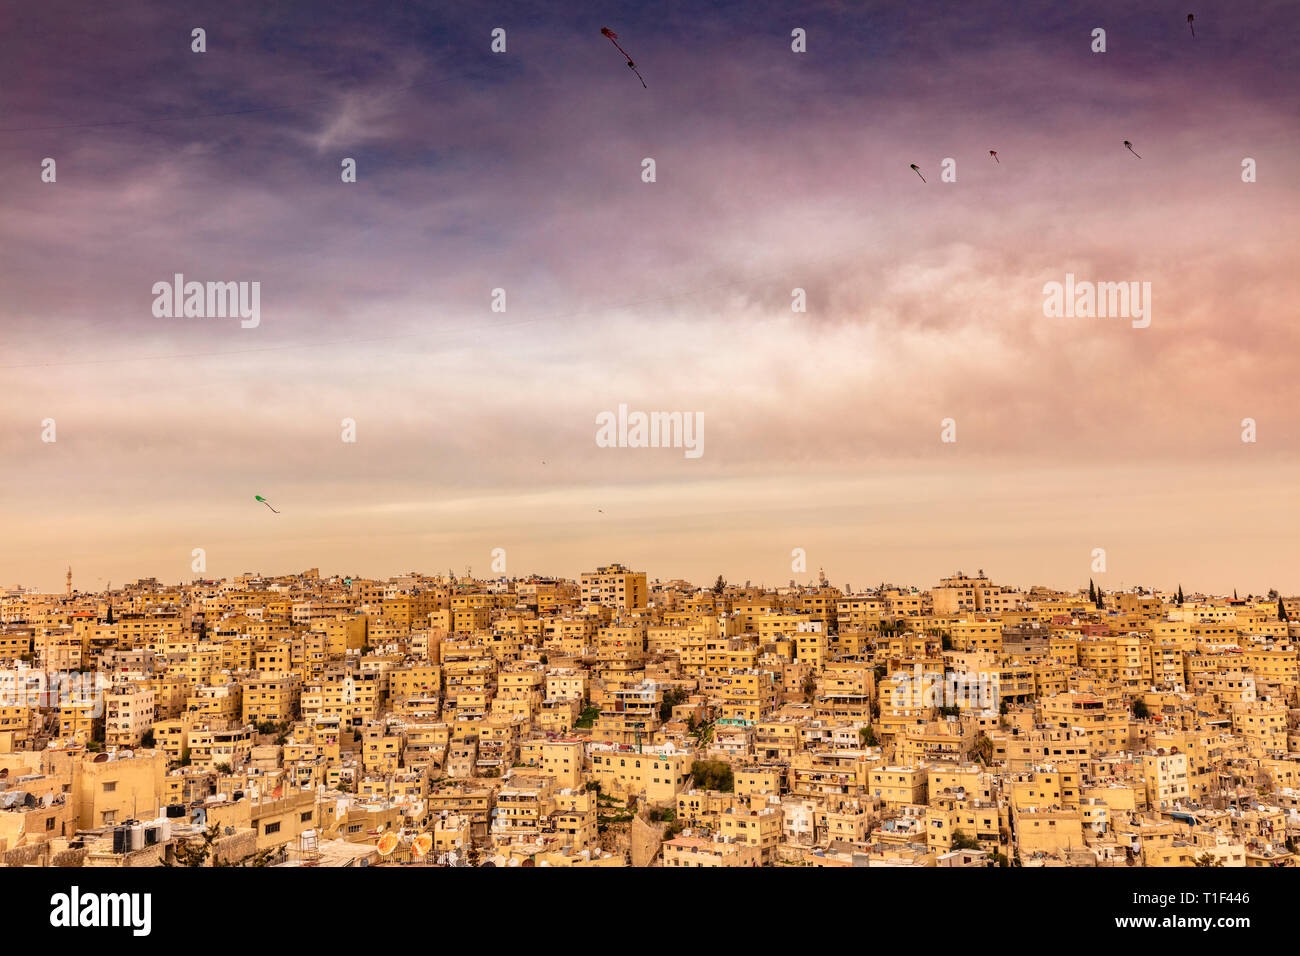 Amman, Jordan, view of the old city, a large complex of decaying buildings overlooking the citadel located on Jabal Al Qal'a. Kites in the sky. Stock Photo